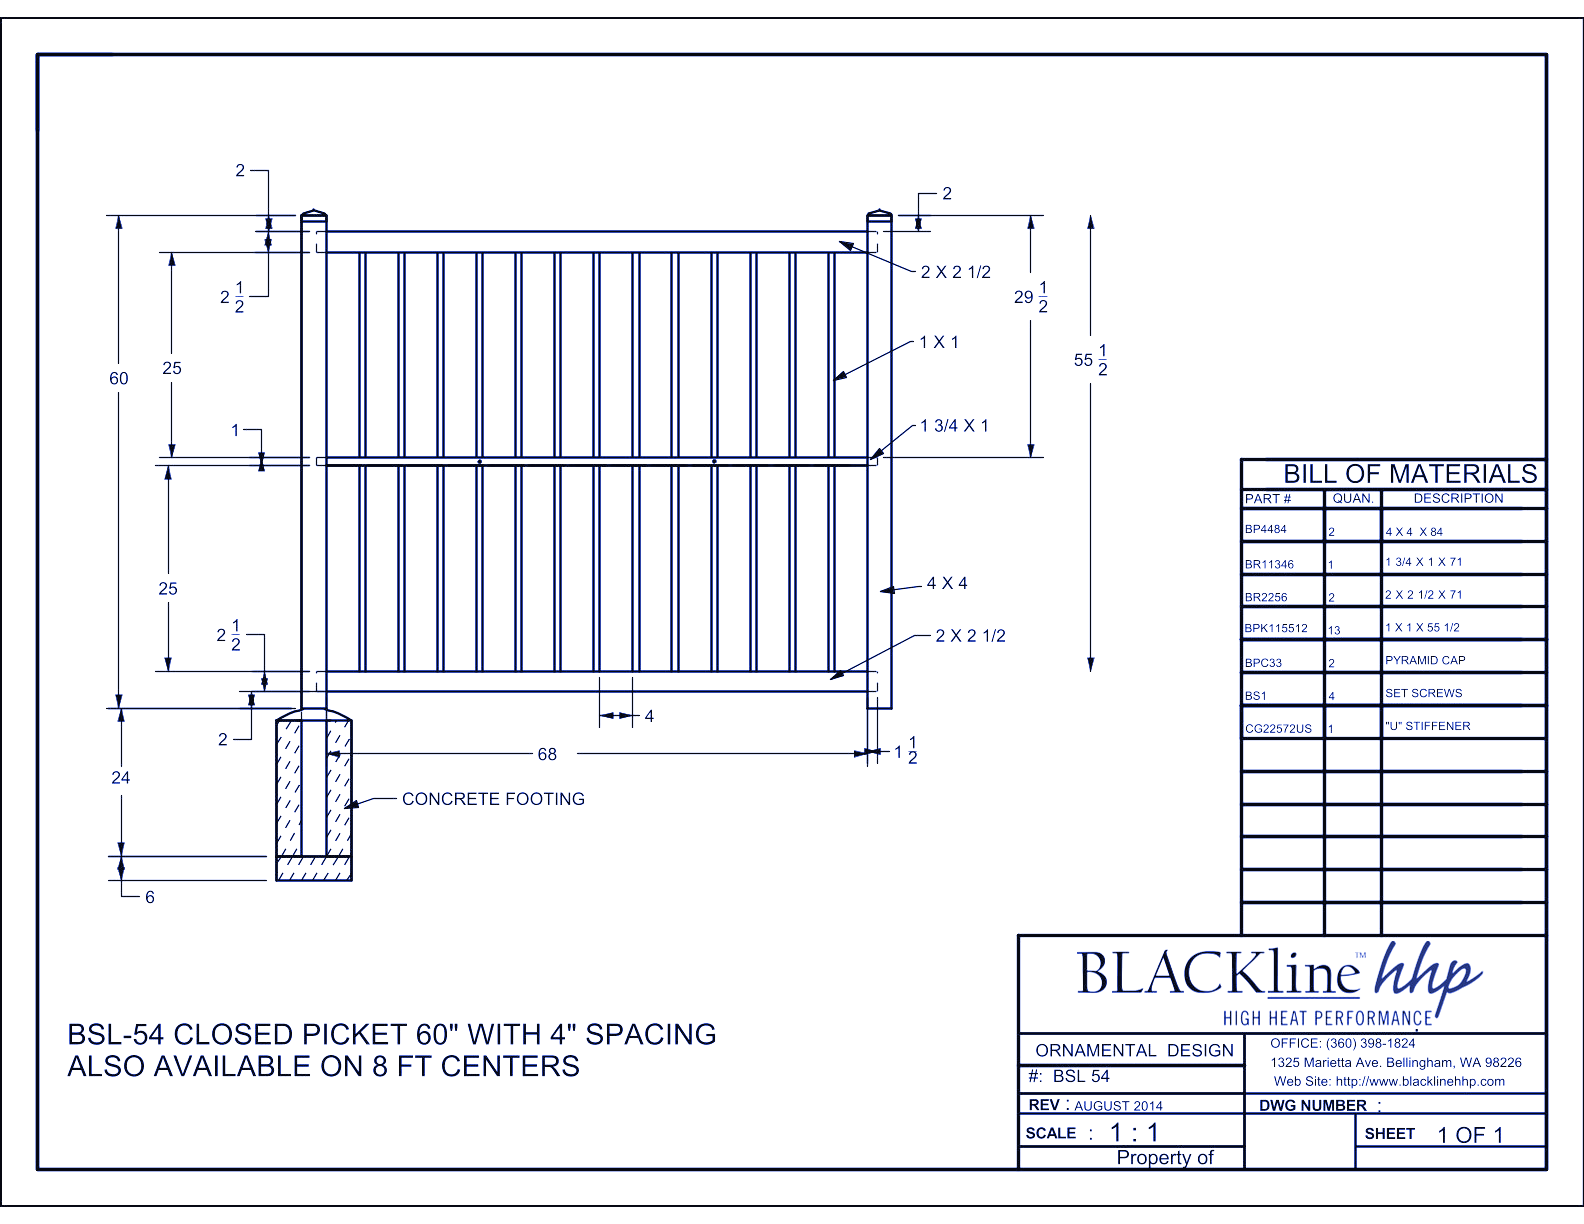 BSL-54: Closed Picket 60" with 4" Spacing - Also Available on 8 Ft. Centers